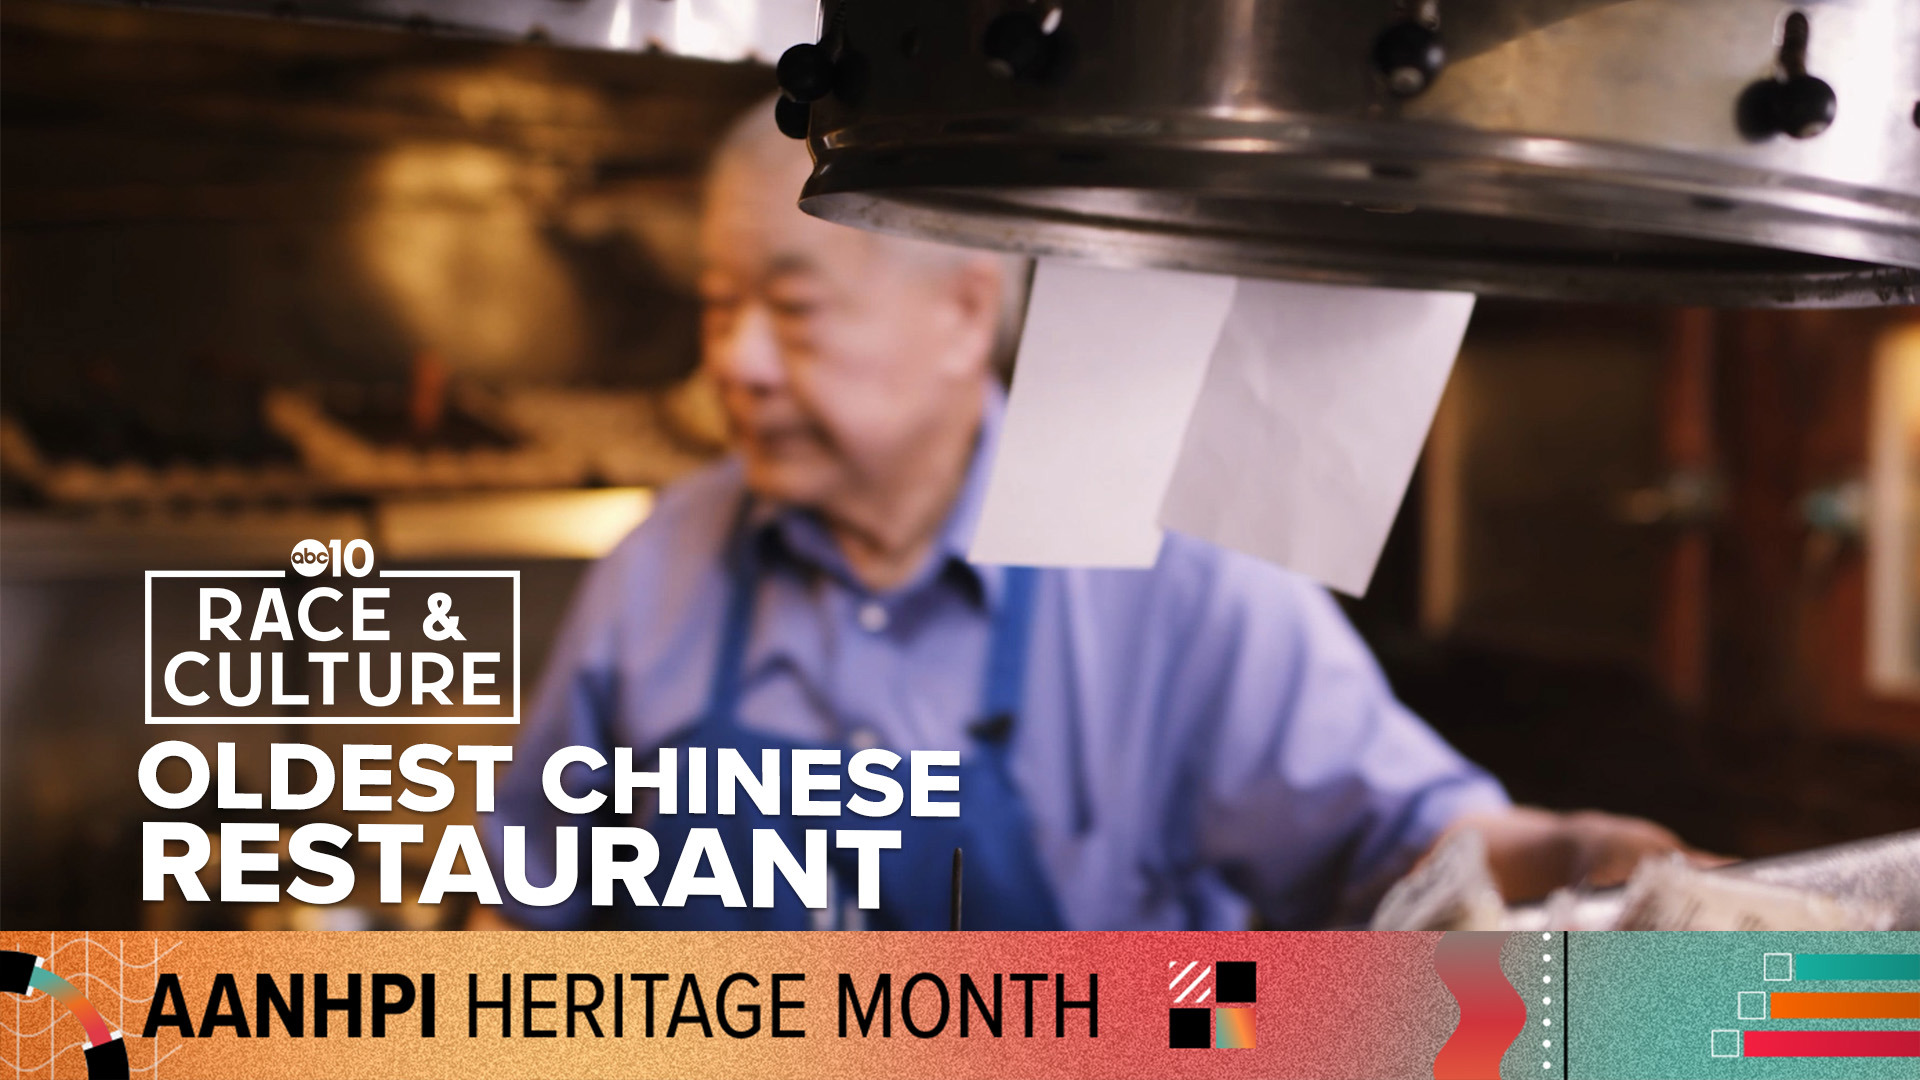 The Chicago Café in Woodland has been a family-run Chinese restaurant since 1903.